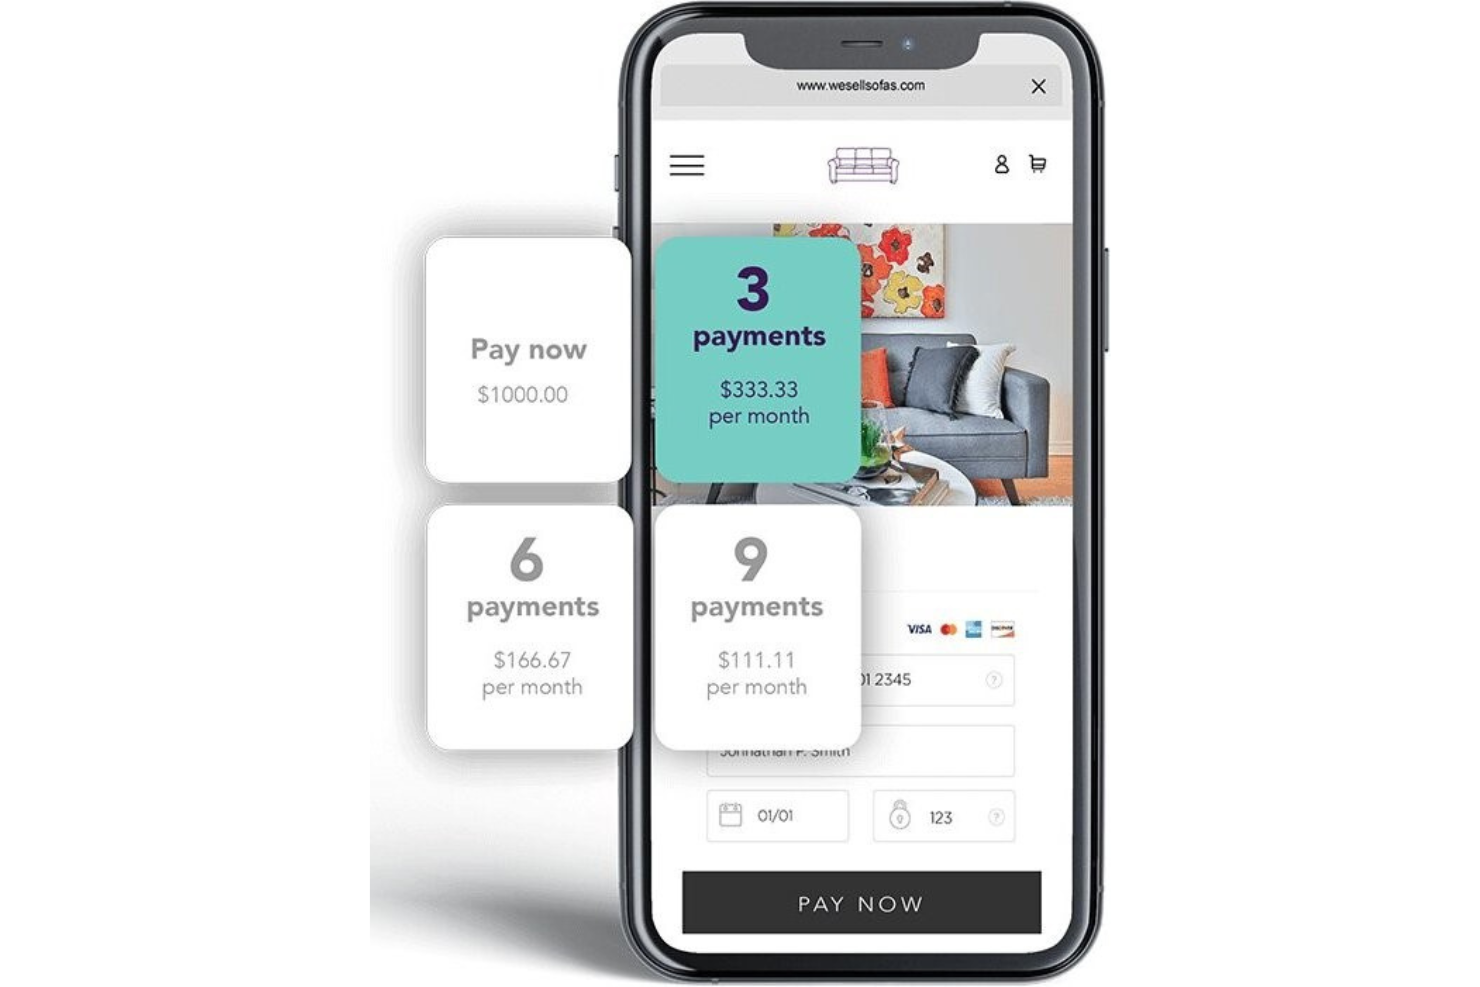 Ecwid Integrates with Afterpay to add Buy Now and Pay Later